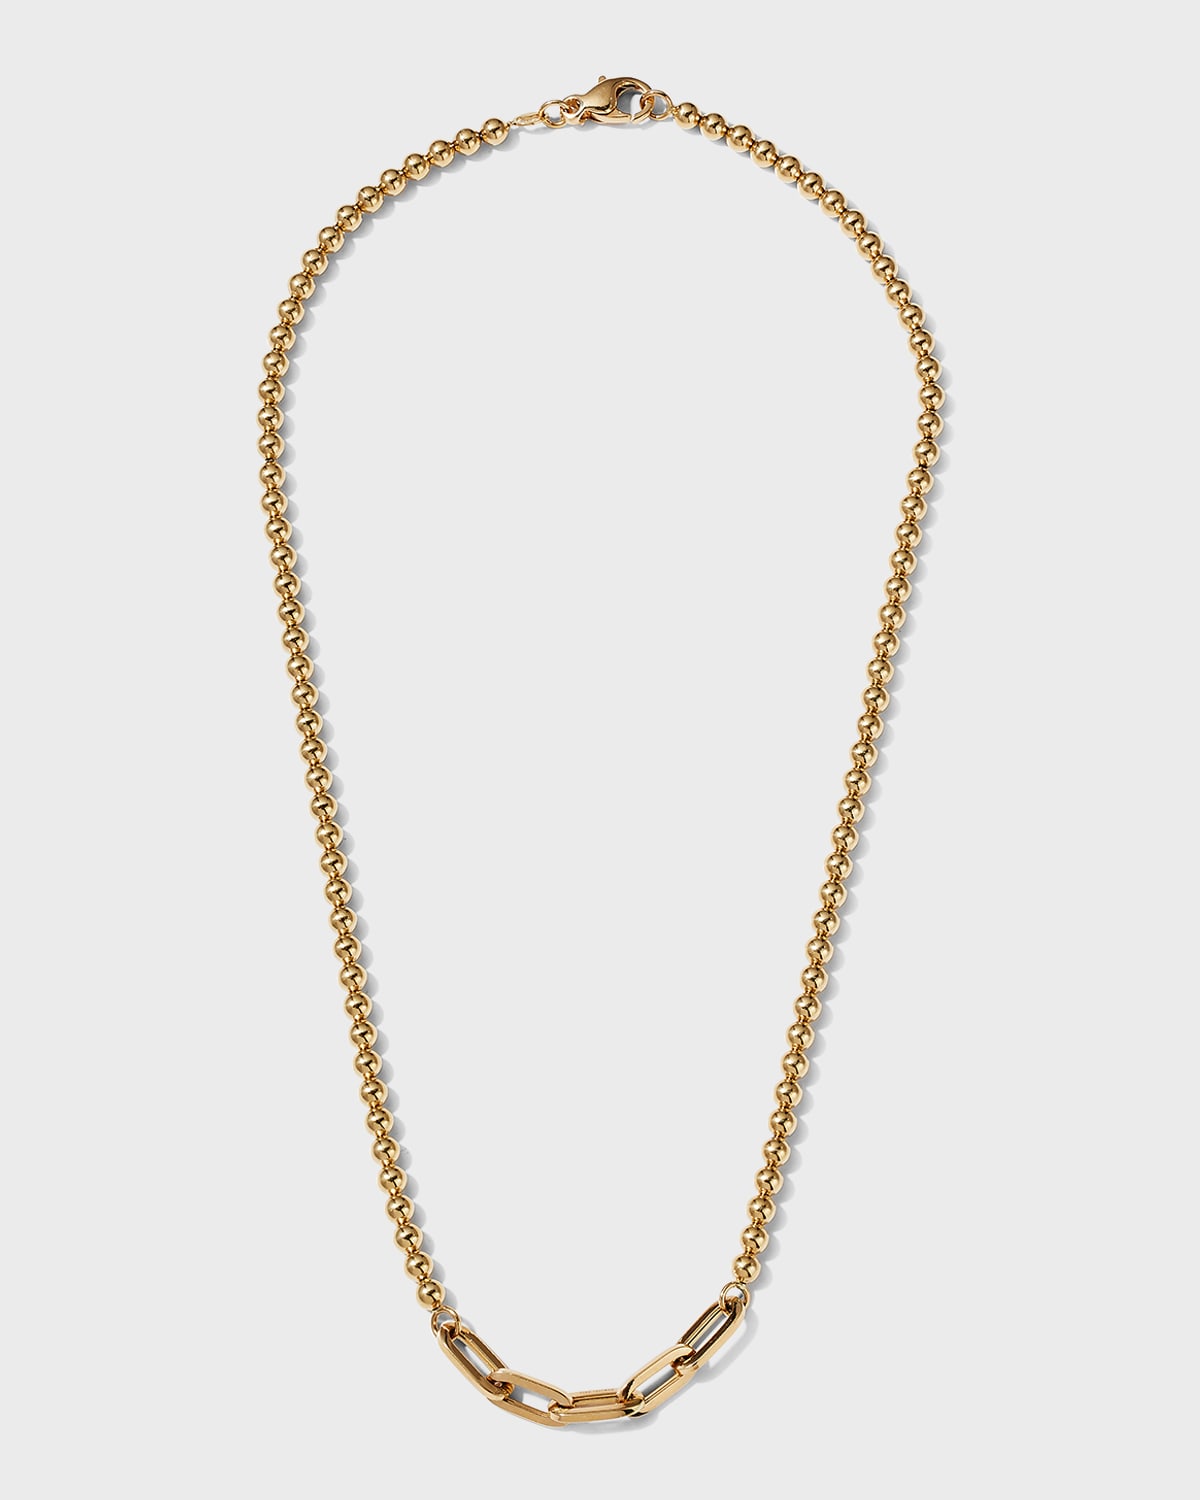 Fern Freeman Jewelry Yellow Gold Ball Chain and Triple Paper Clip Link Necklace